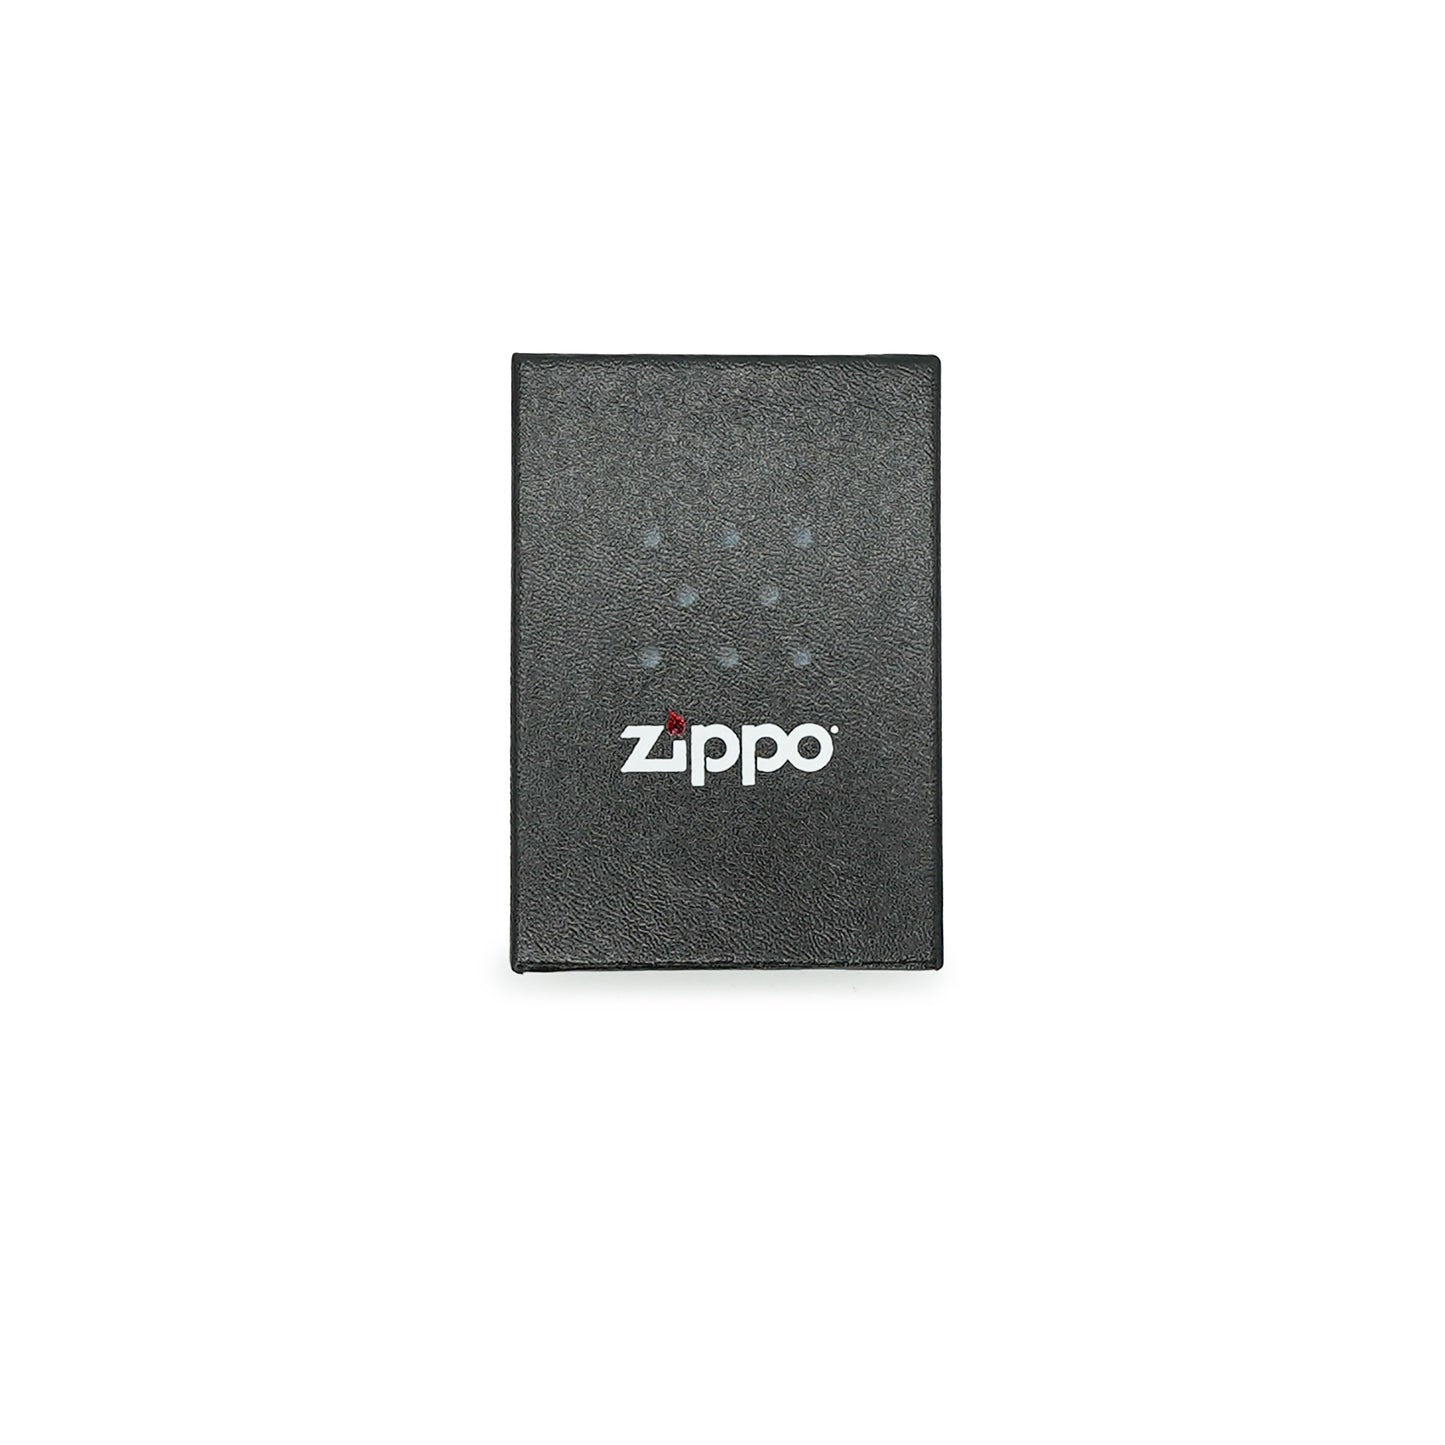 Chapter 17 - Zippo Lighter - Ever Dream This Man? - Glow in the Dark